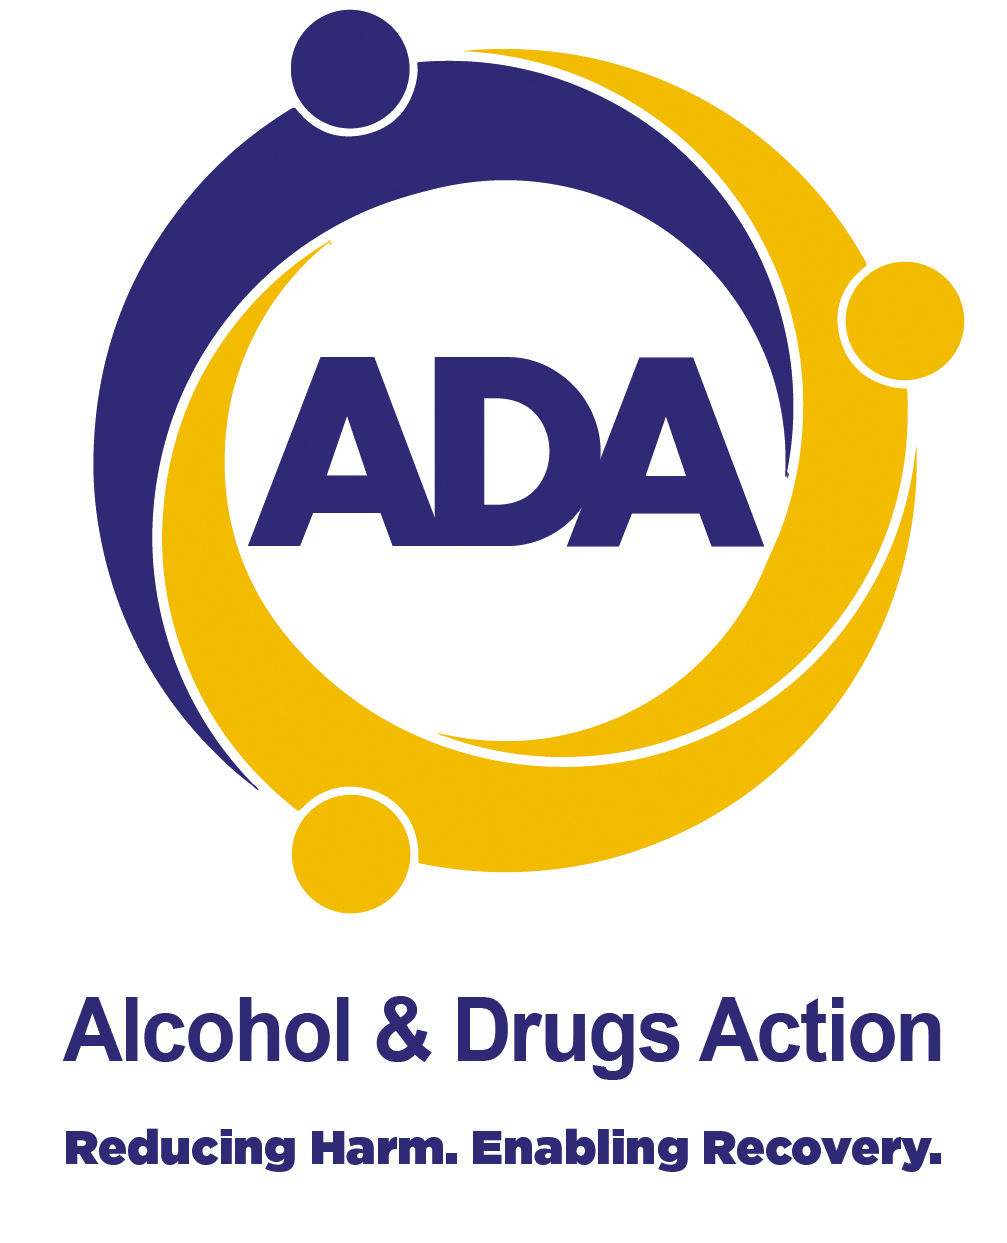 Alcohol & Drugs Action Logo